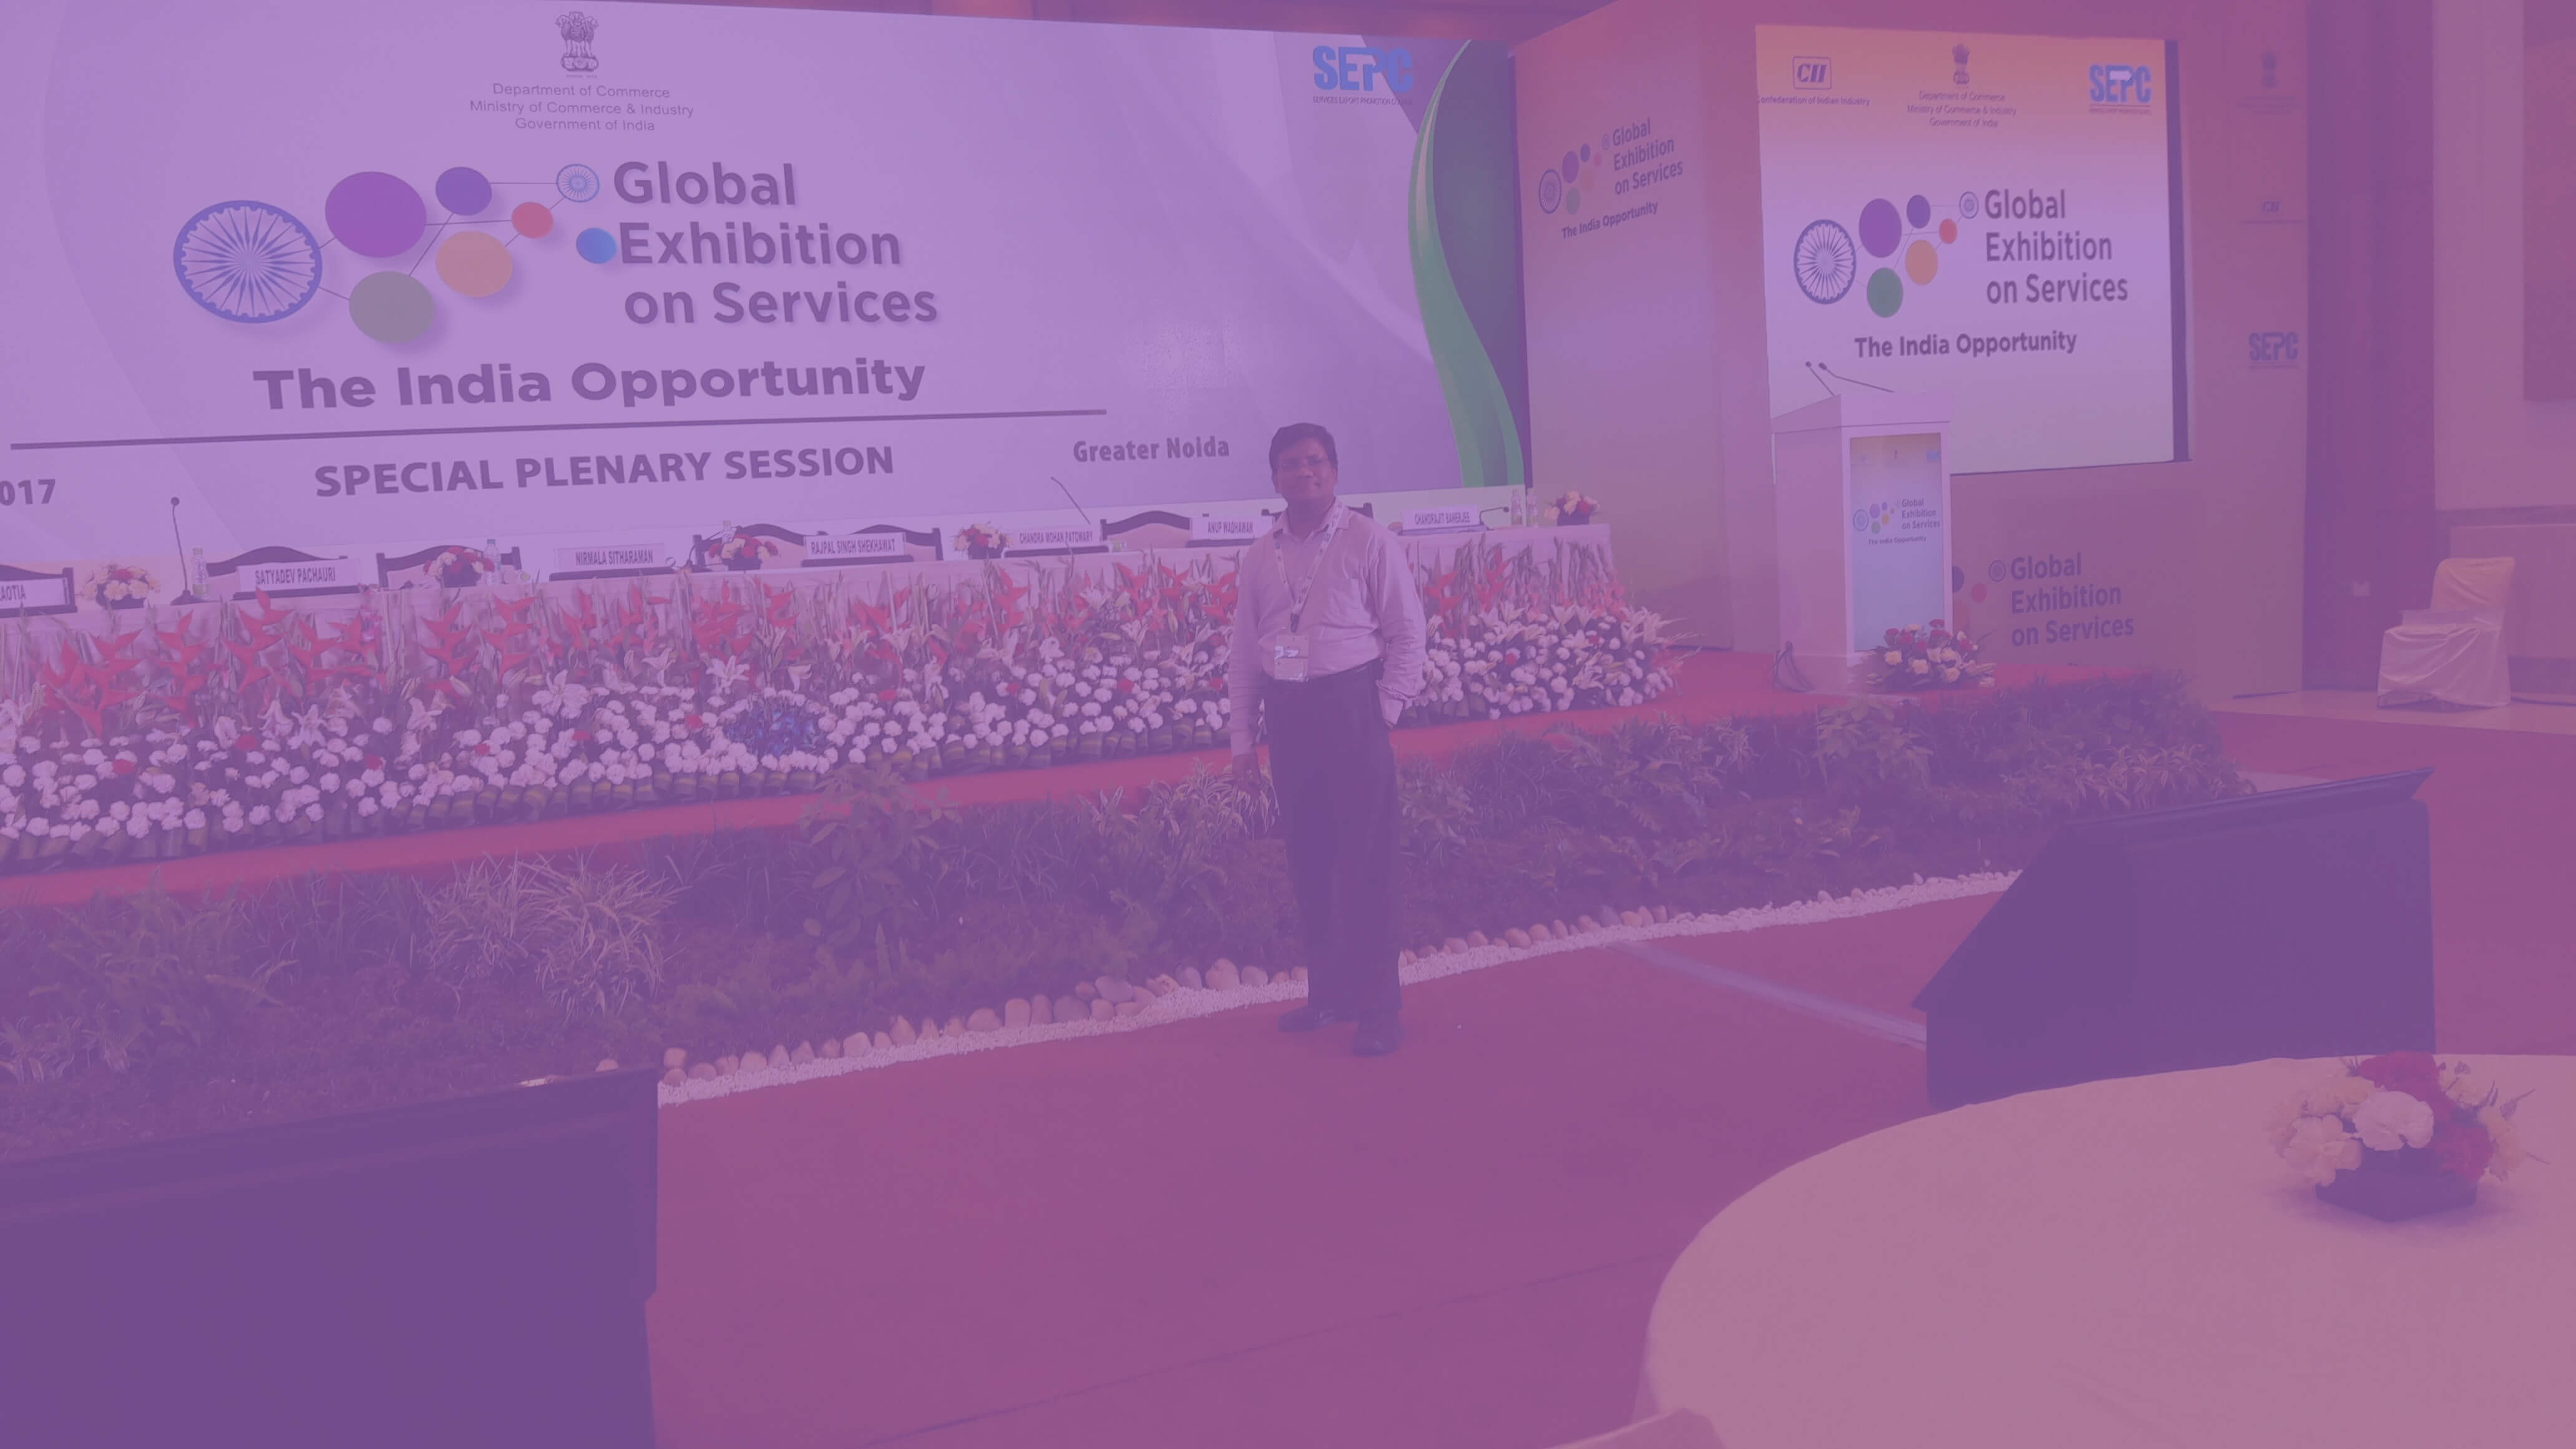 Participated – Global Exhibition on Services 2017